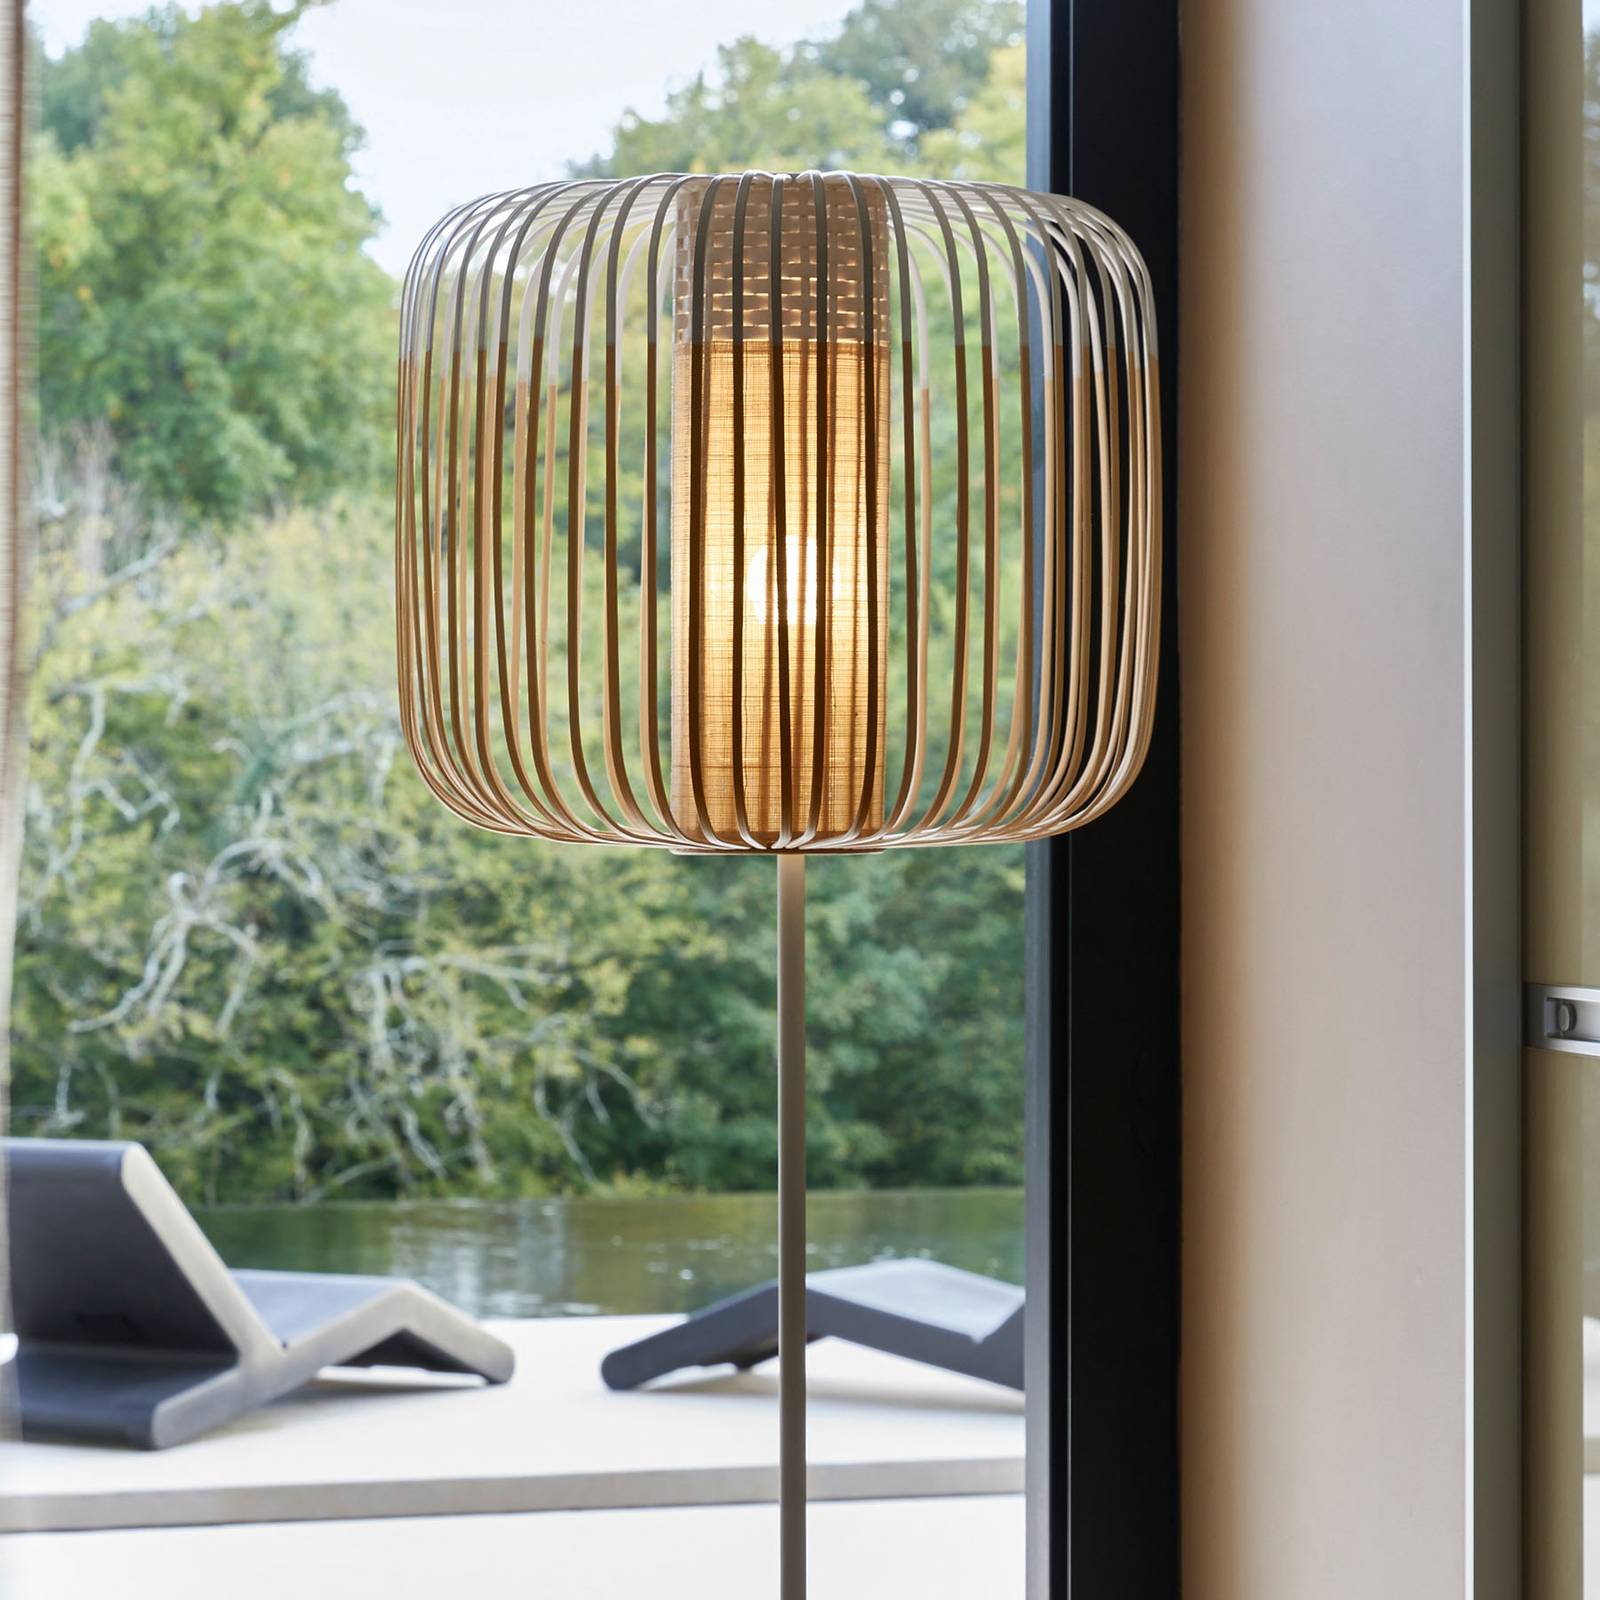 Image of Forestier Bamboo Light lampadaire à 1 lampe blanc 3700663915297